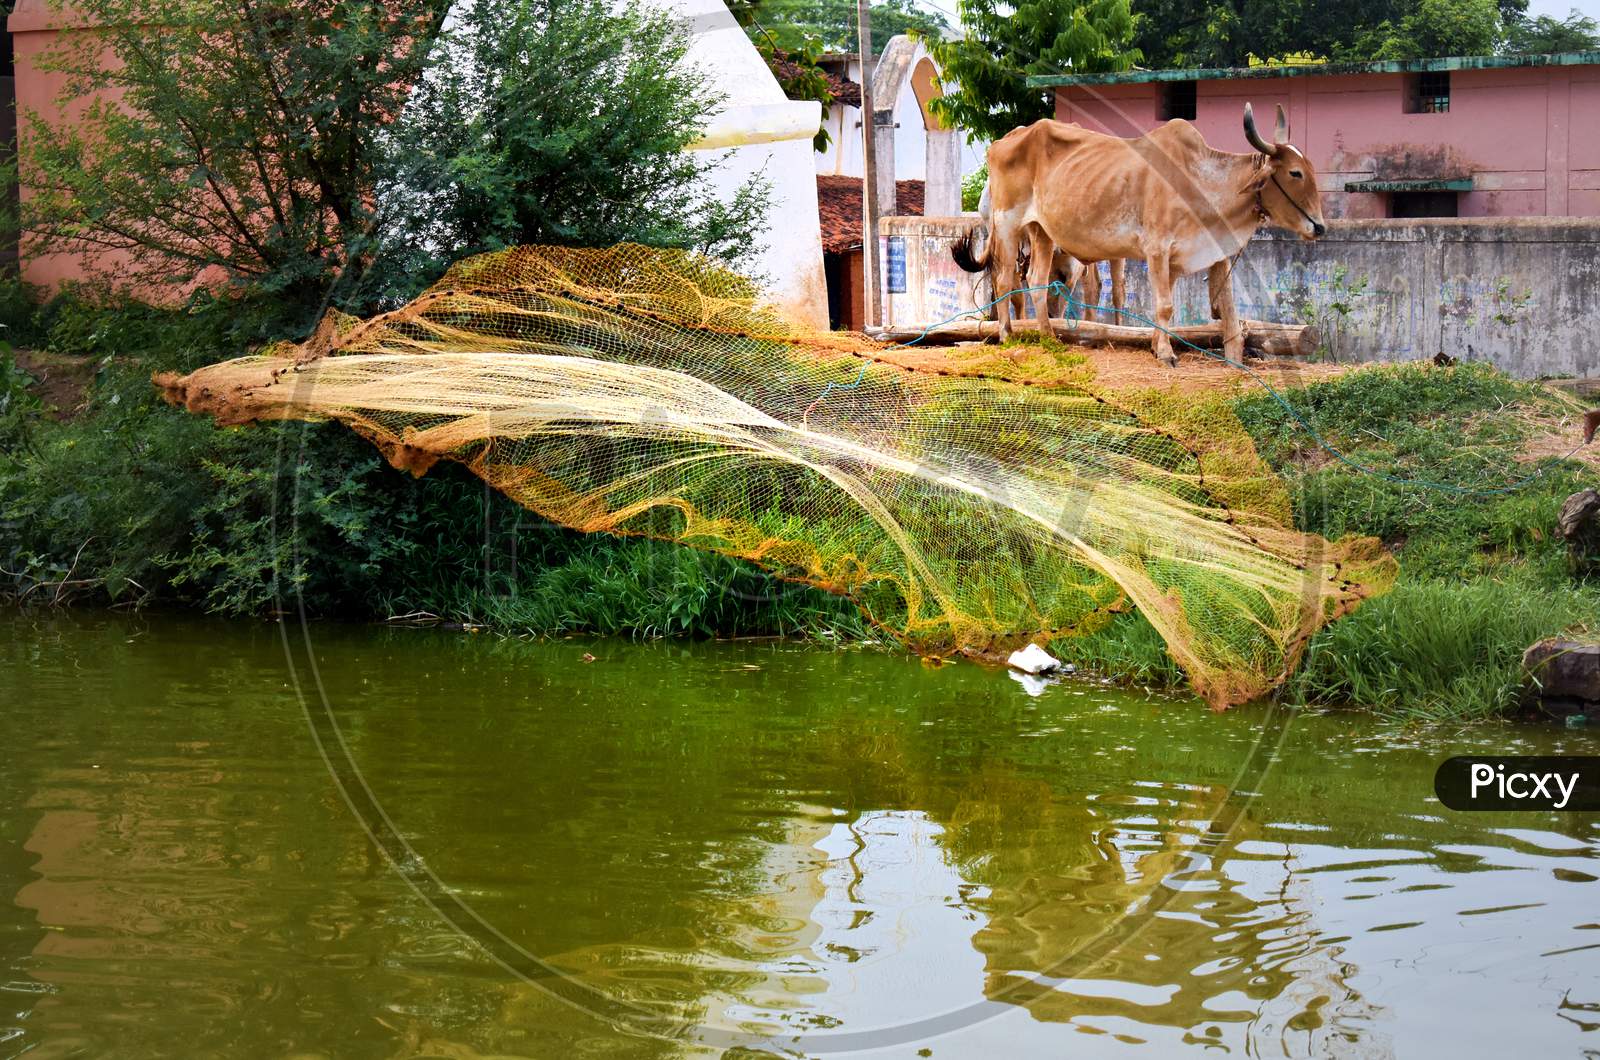 Cast net perfectly thrown into the pond